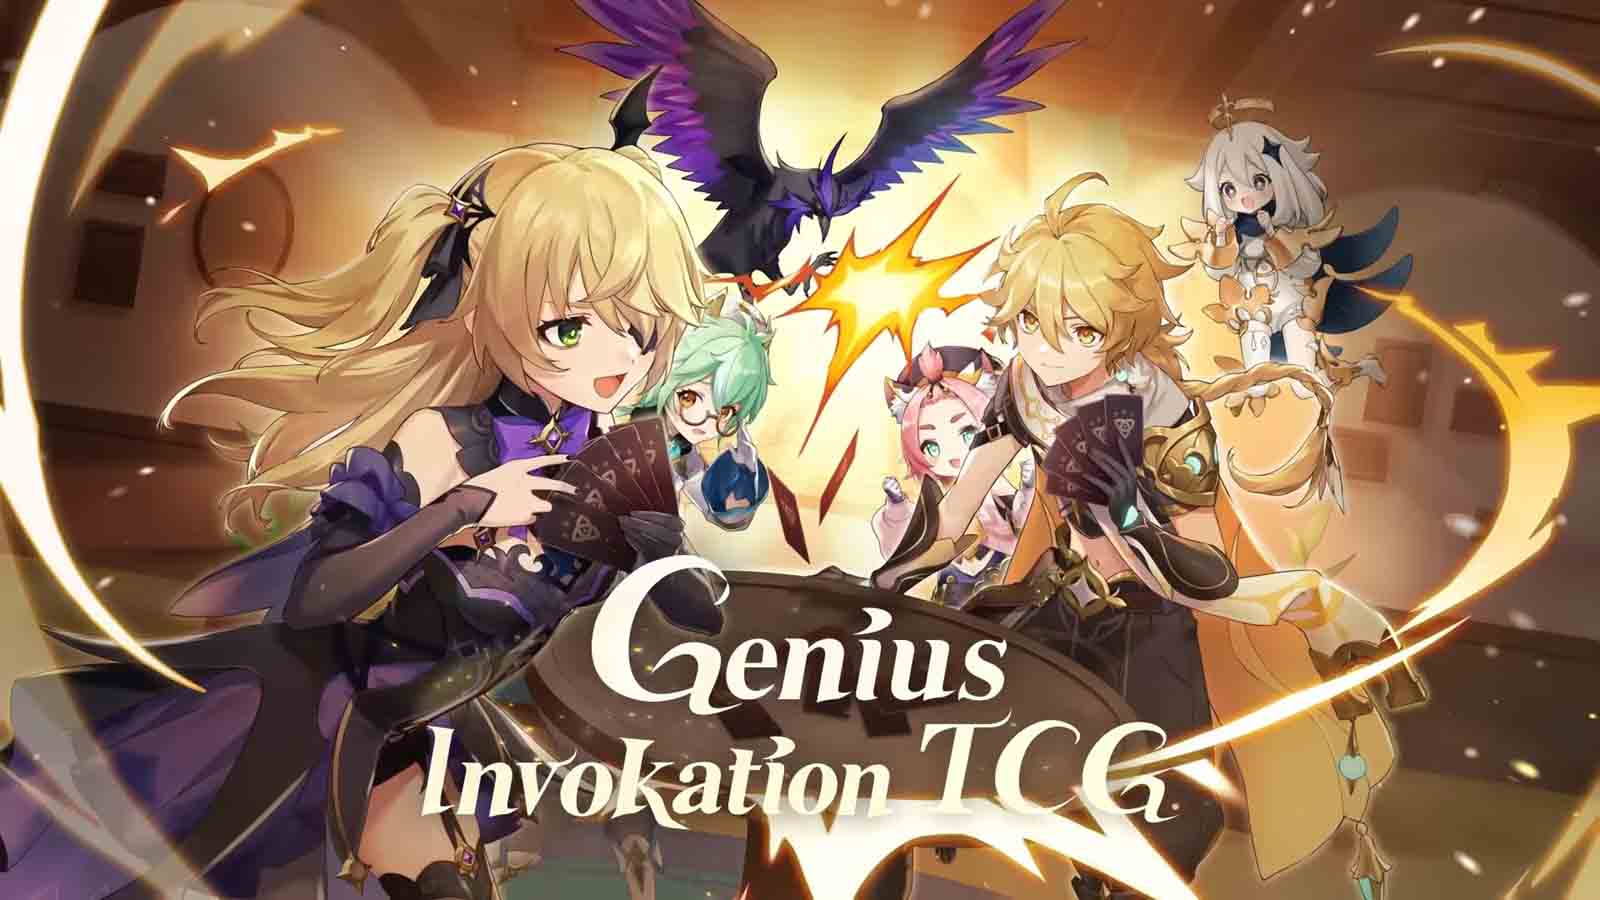 How to Increase Player Level in Genius Invokation TCG